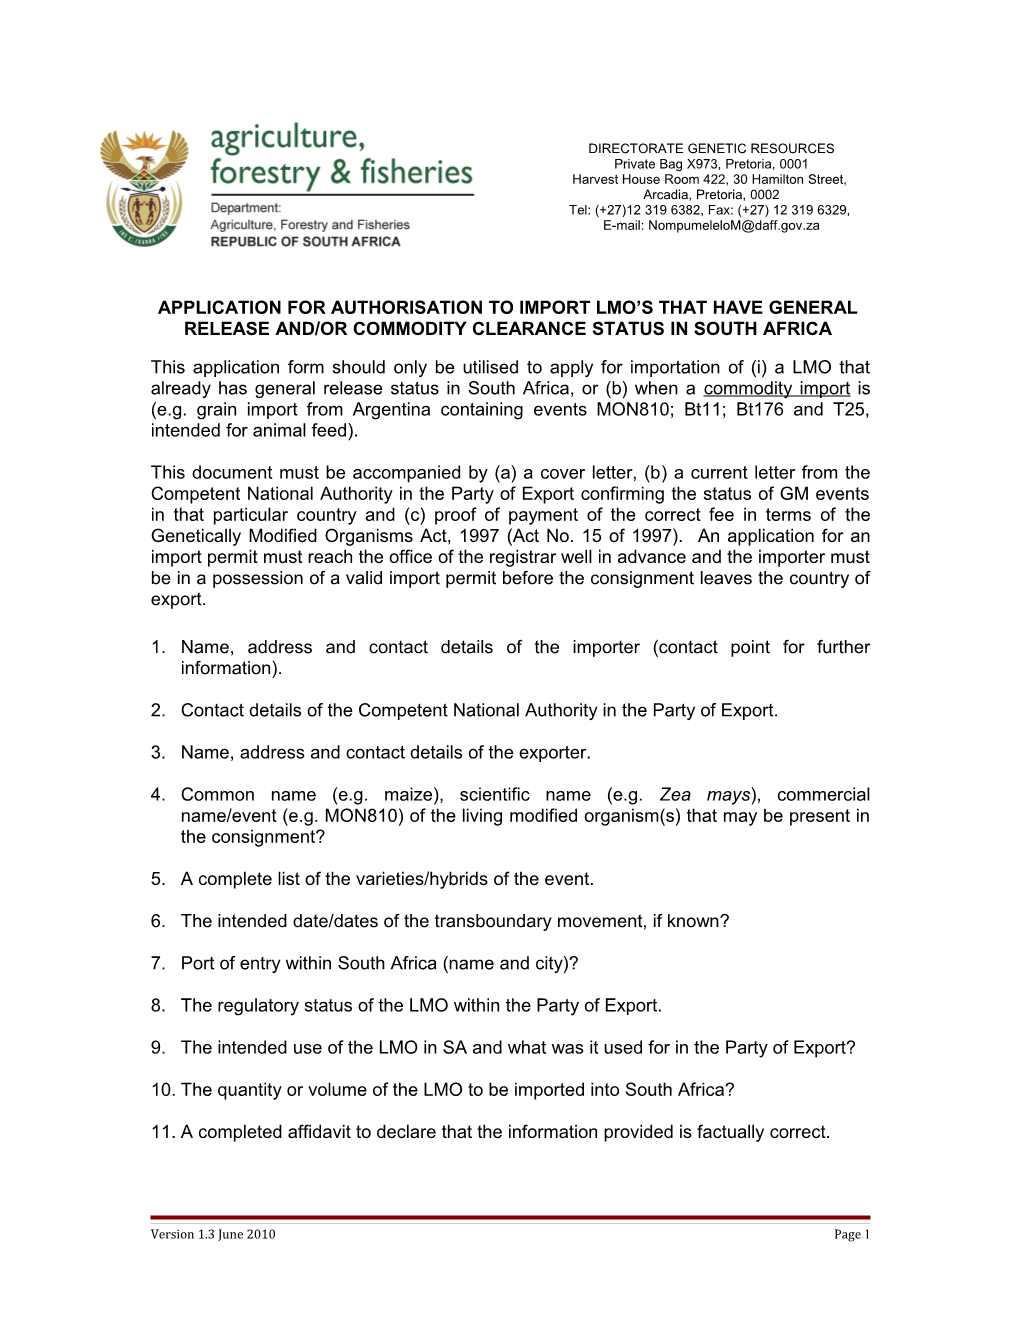 Release And/Or Commodity Clearance Status in South Africa